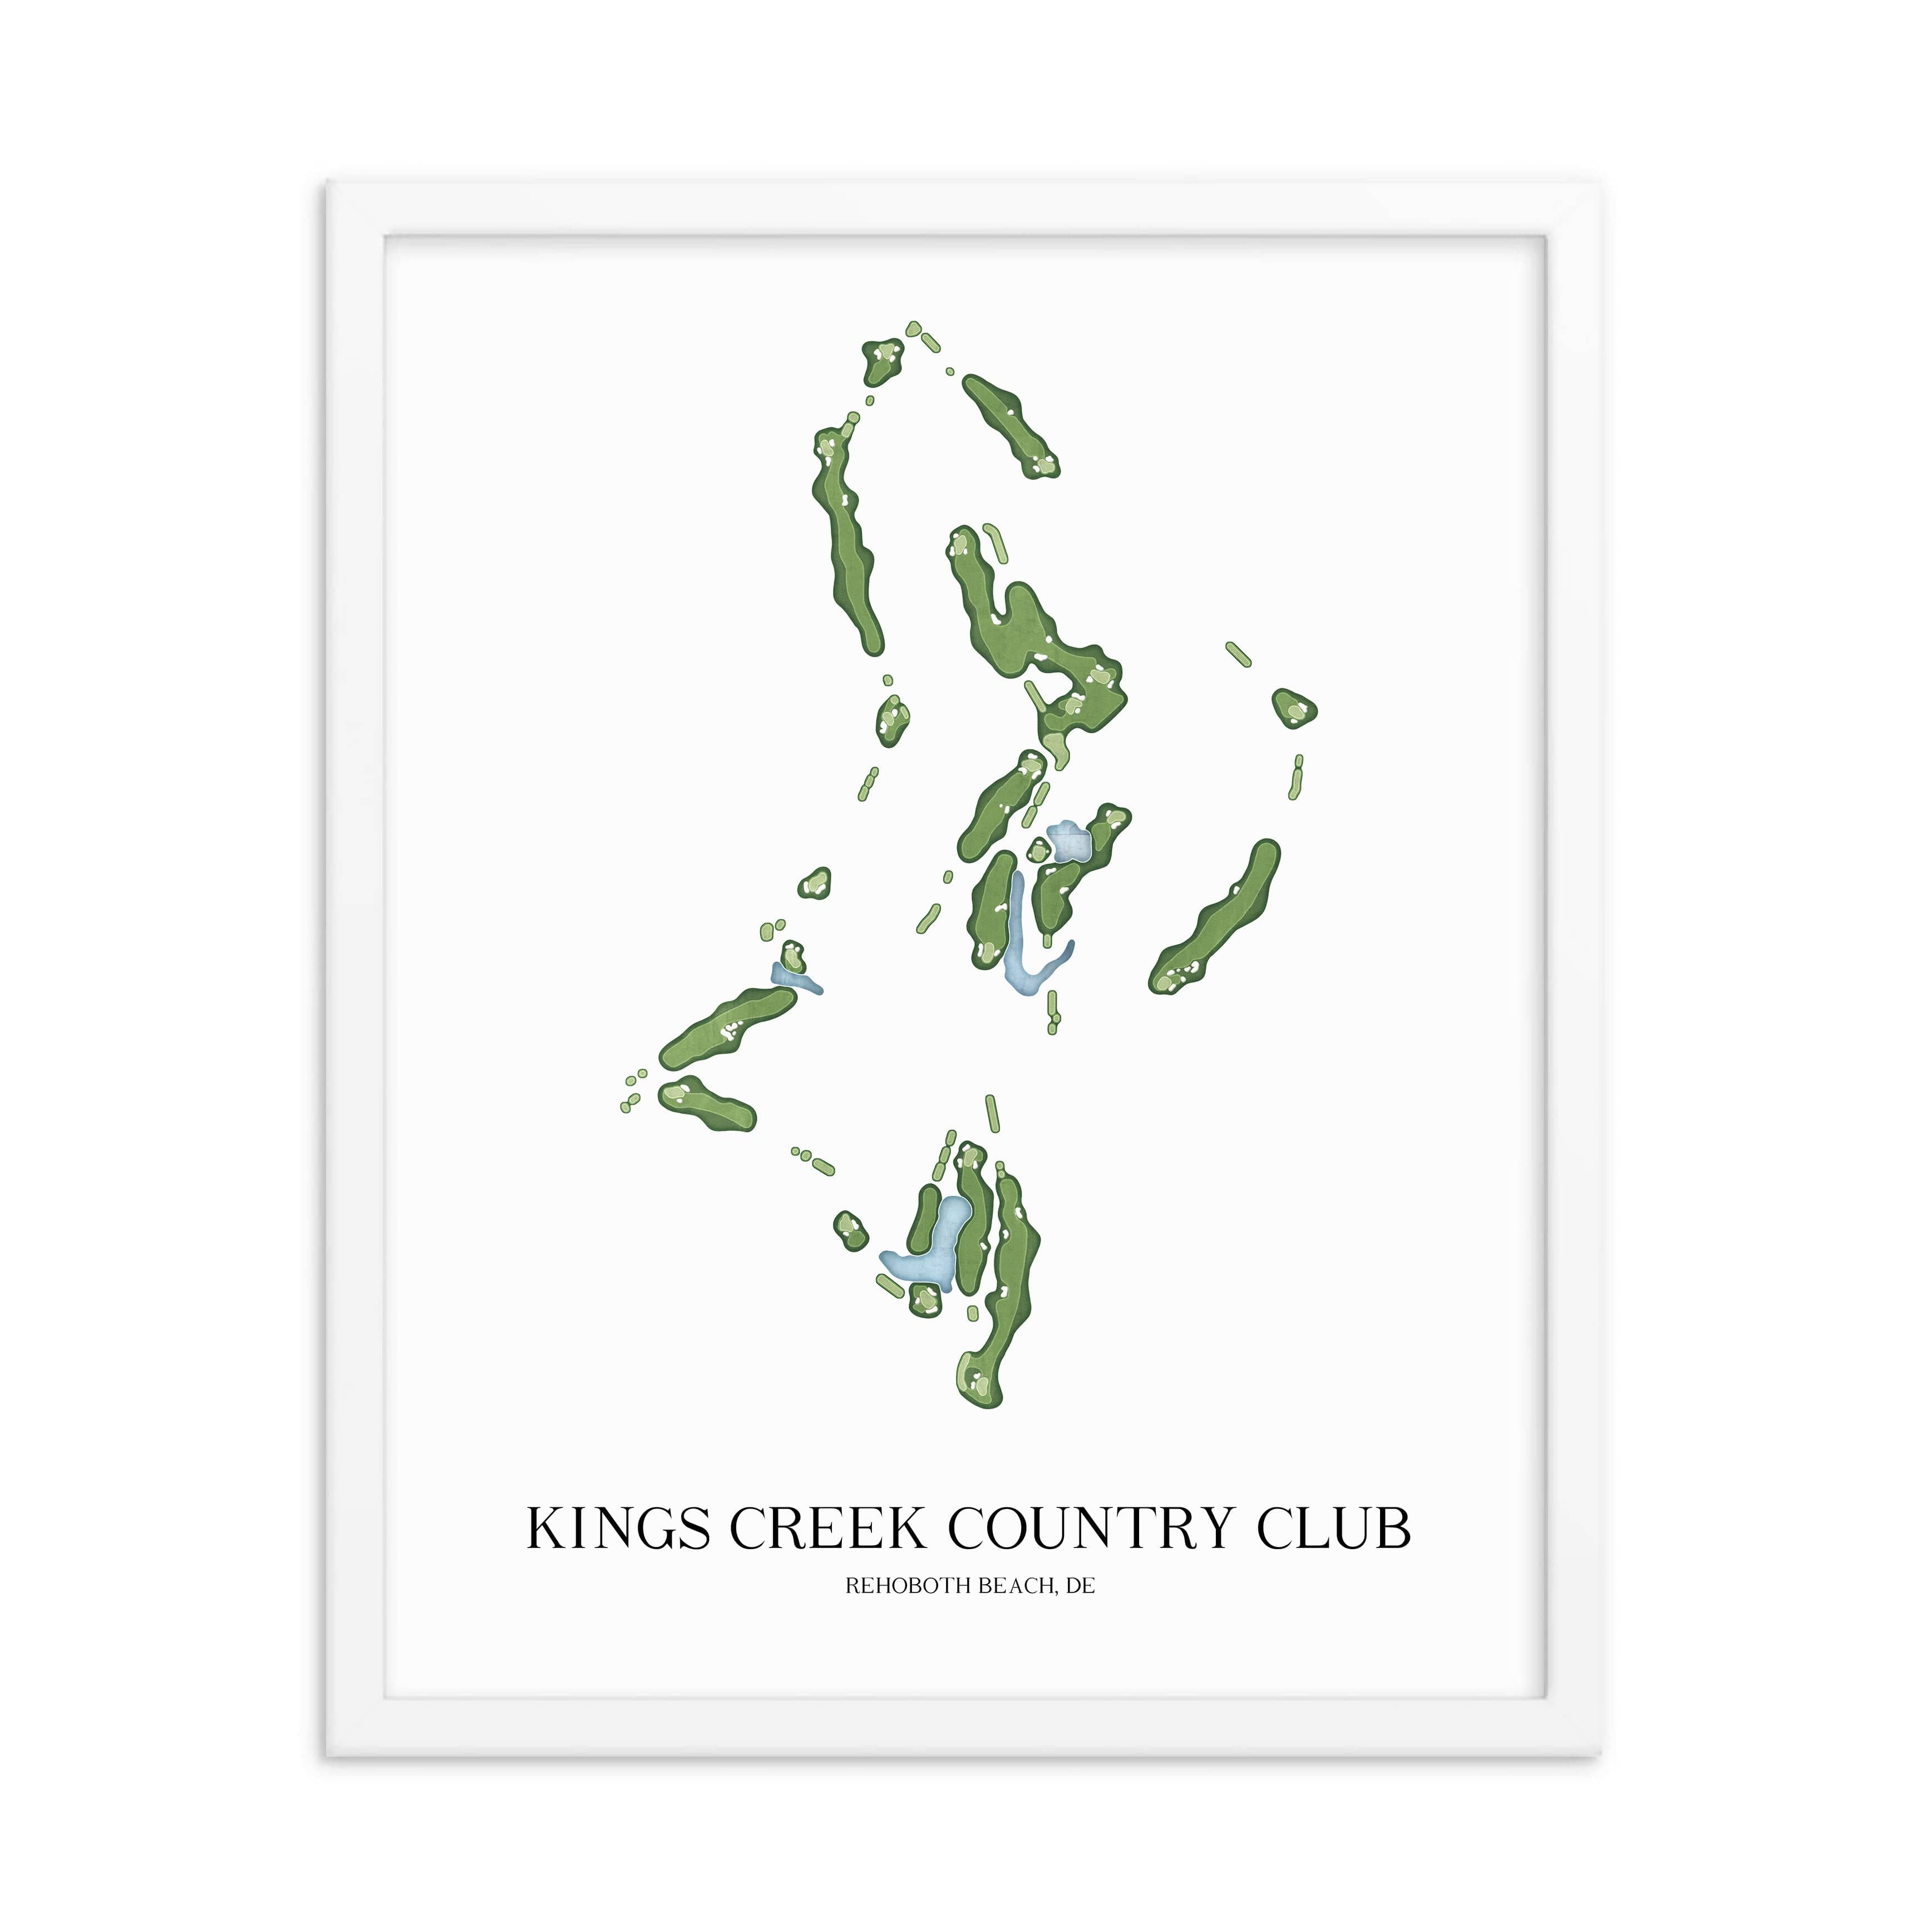 The 19th Hole Golf Shop - Golf Course Prints -  Kings Creek Country Club Golf Course Map